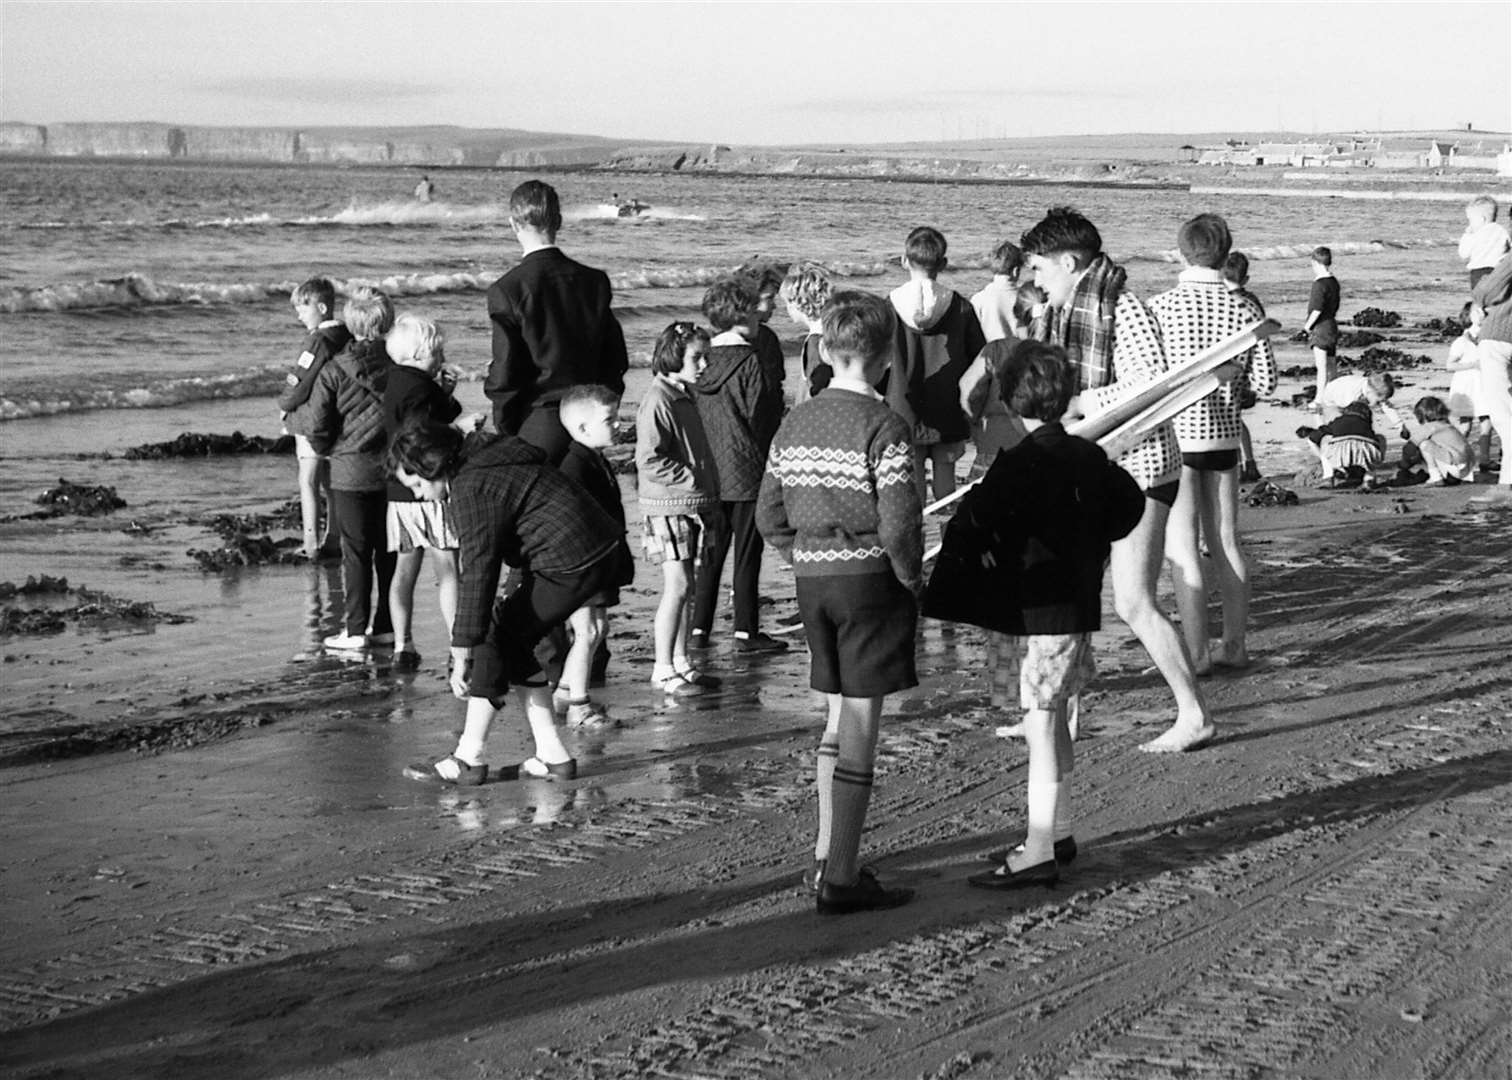 Water skiing at Thurso beach – the first in a series of images we will be publishing from the Jack Selby Collection, courtesy of Thurso Heritage Society.